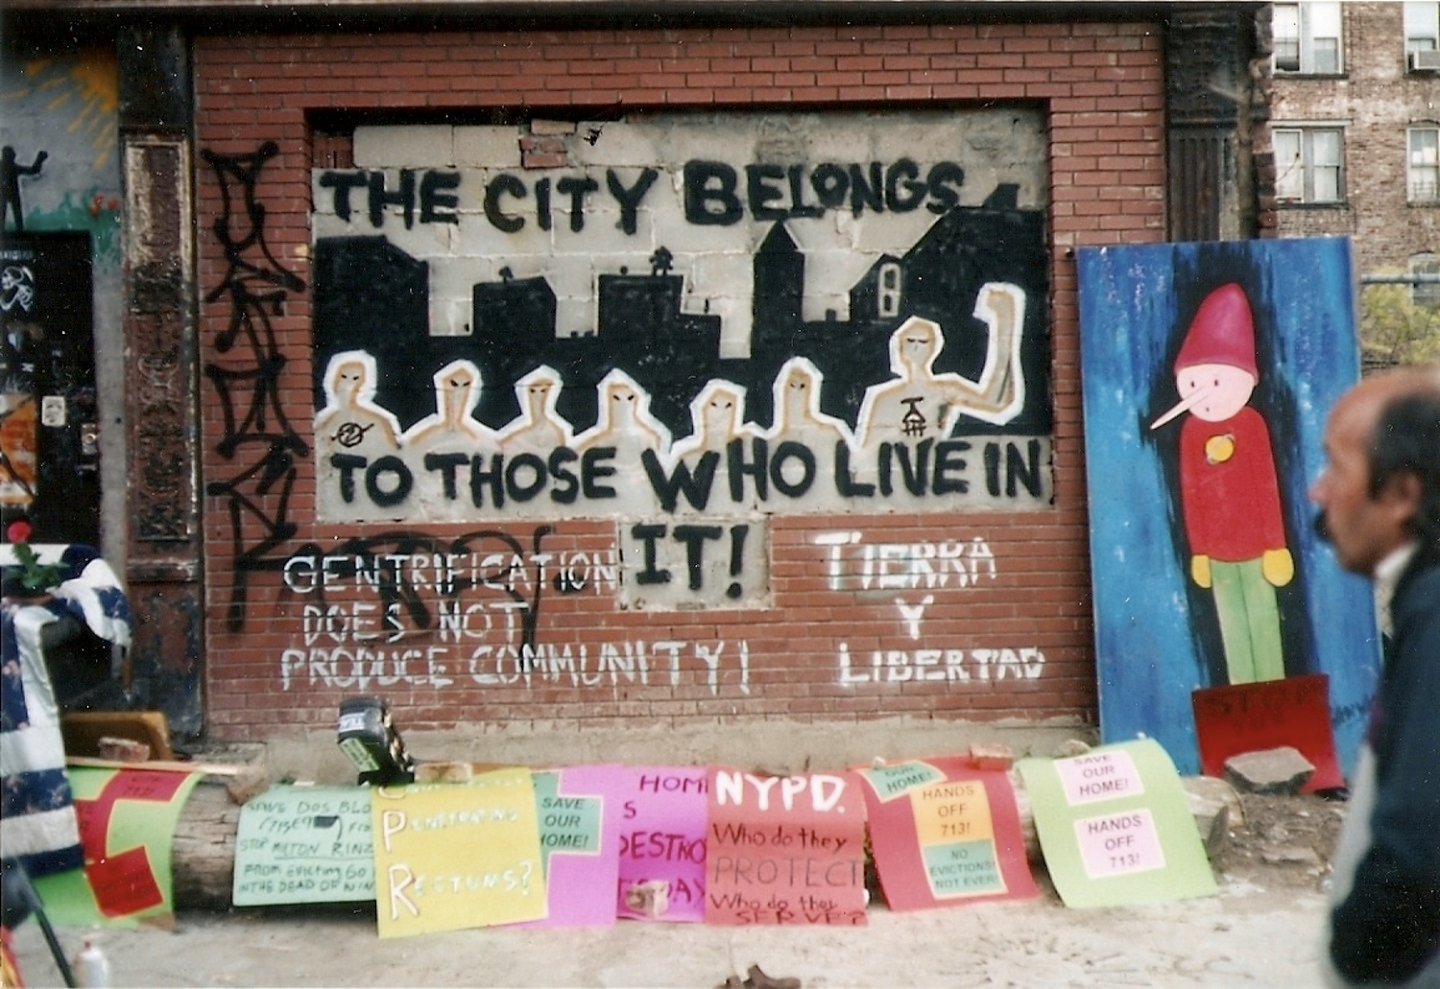 A red-bricked wall with a rectangular cut out at the center with grey bricks. The following words are painted in black capital letters “THE CITY BELONGS TO THOSE WHO LIVE IN IT!”. Below these words on the red brick, the following messages are painted in white letters: “Gentrification does not produce community!” and “Tierra Y Libertad”. A series of handmade posters line the ground in front of the mural, while a vertical painting depicting what appears to be Pinocchio is propped against the wall to the right.